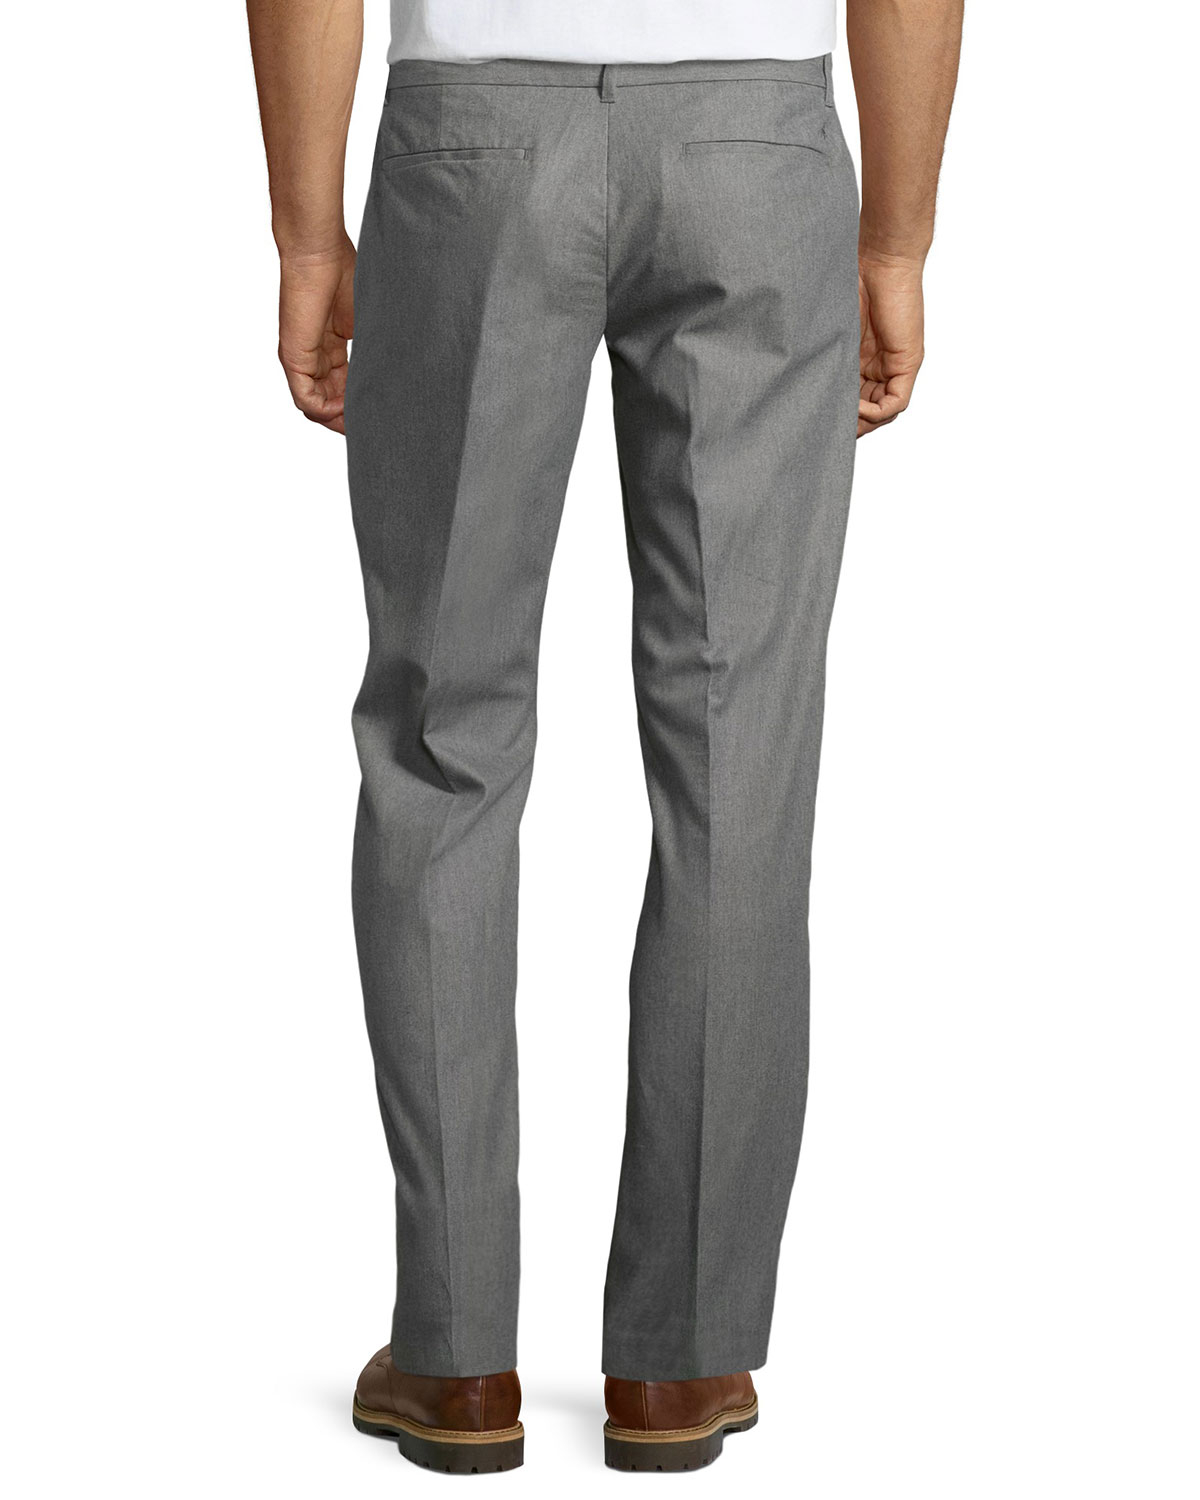 Download Lyst - Original Penguin Flat-Front Heather Twill Pants in ...